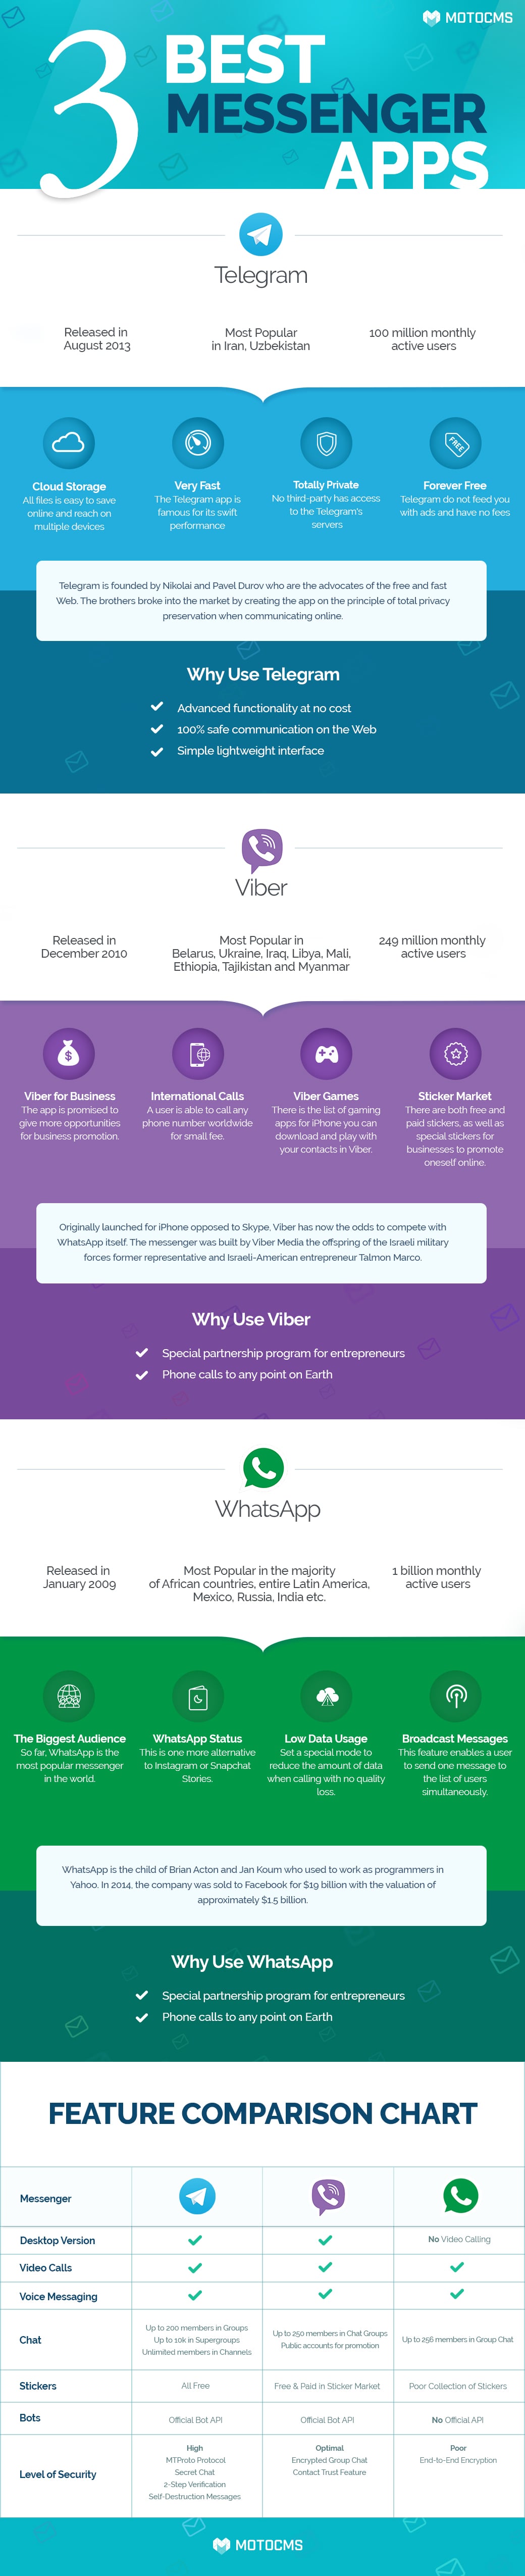 Messenger apps - free infographic